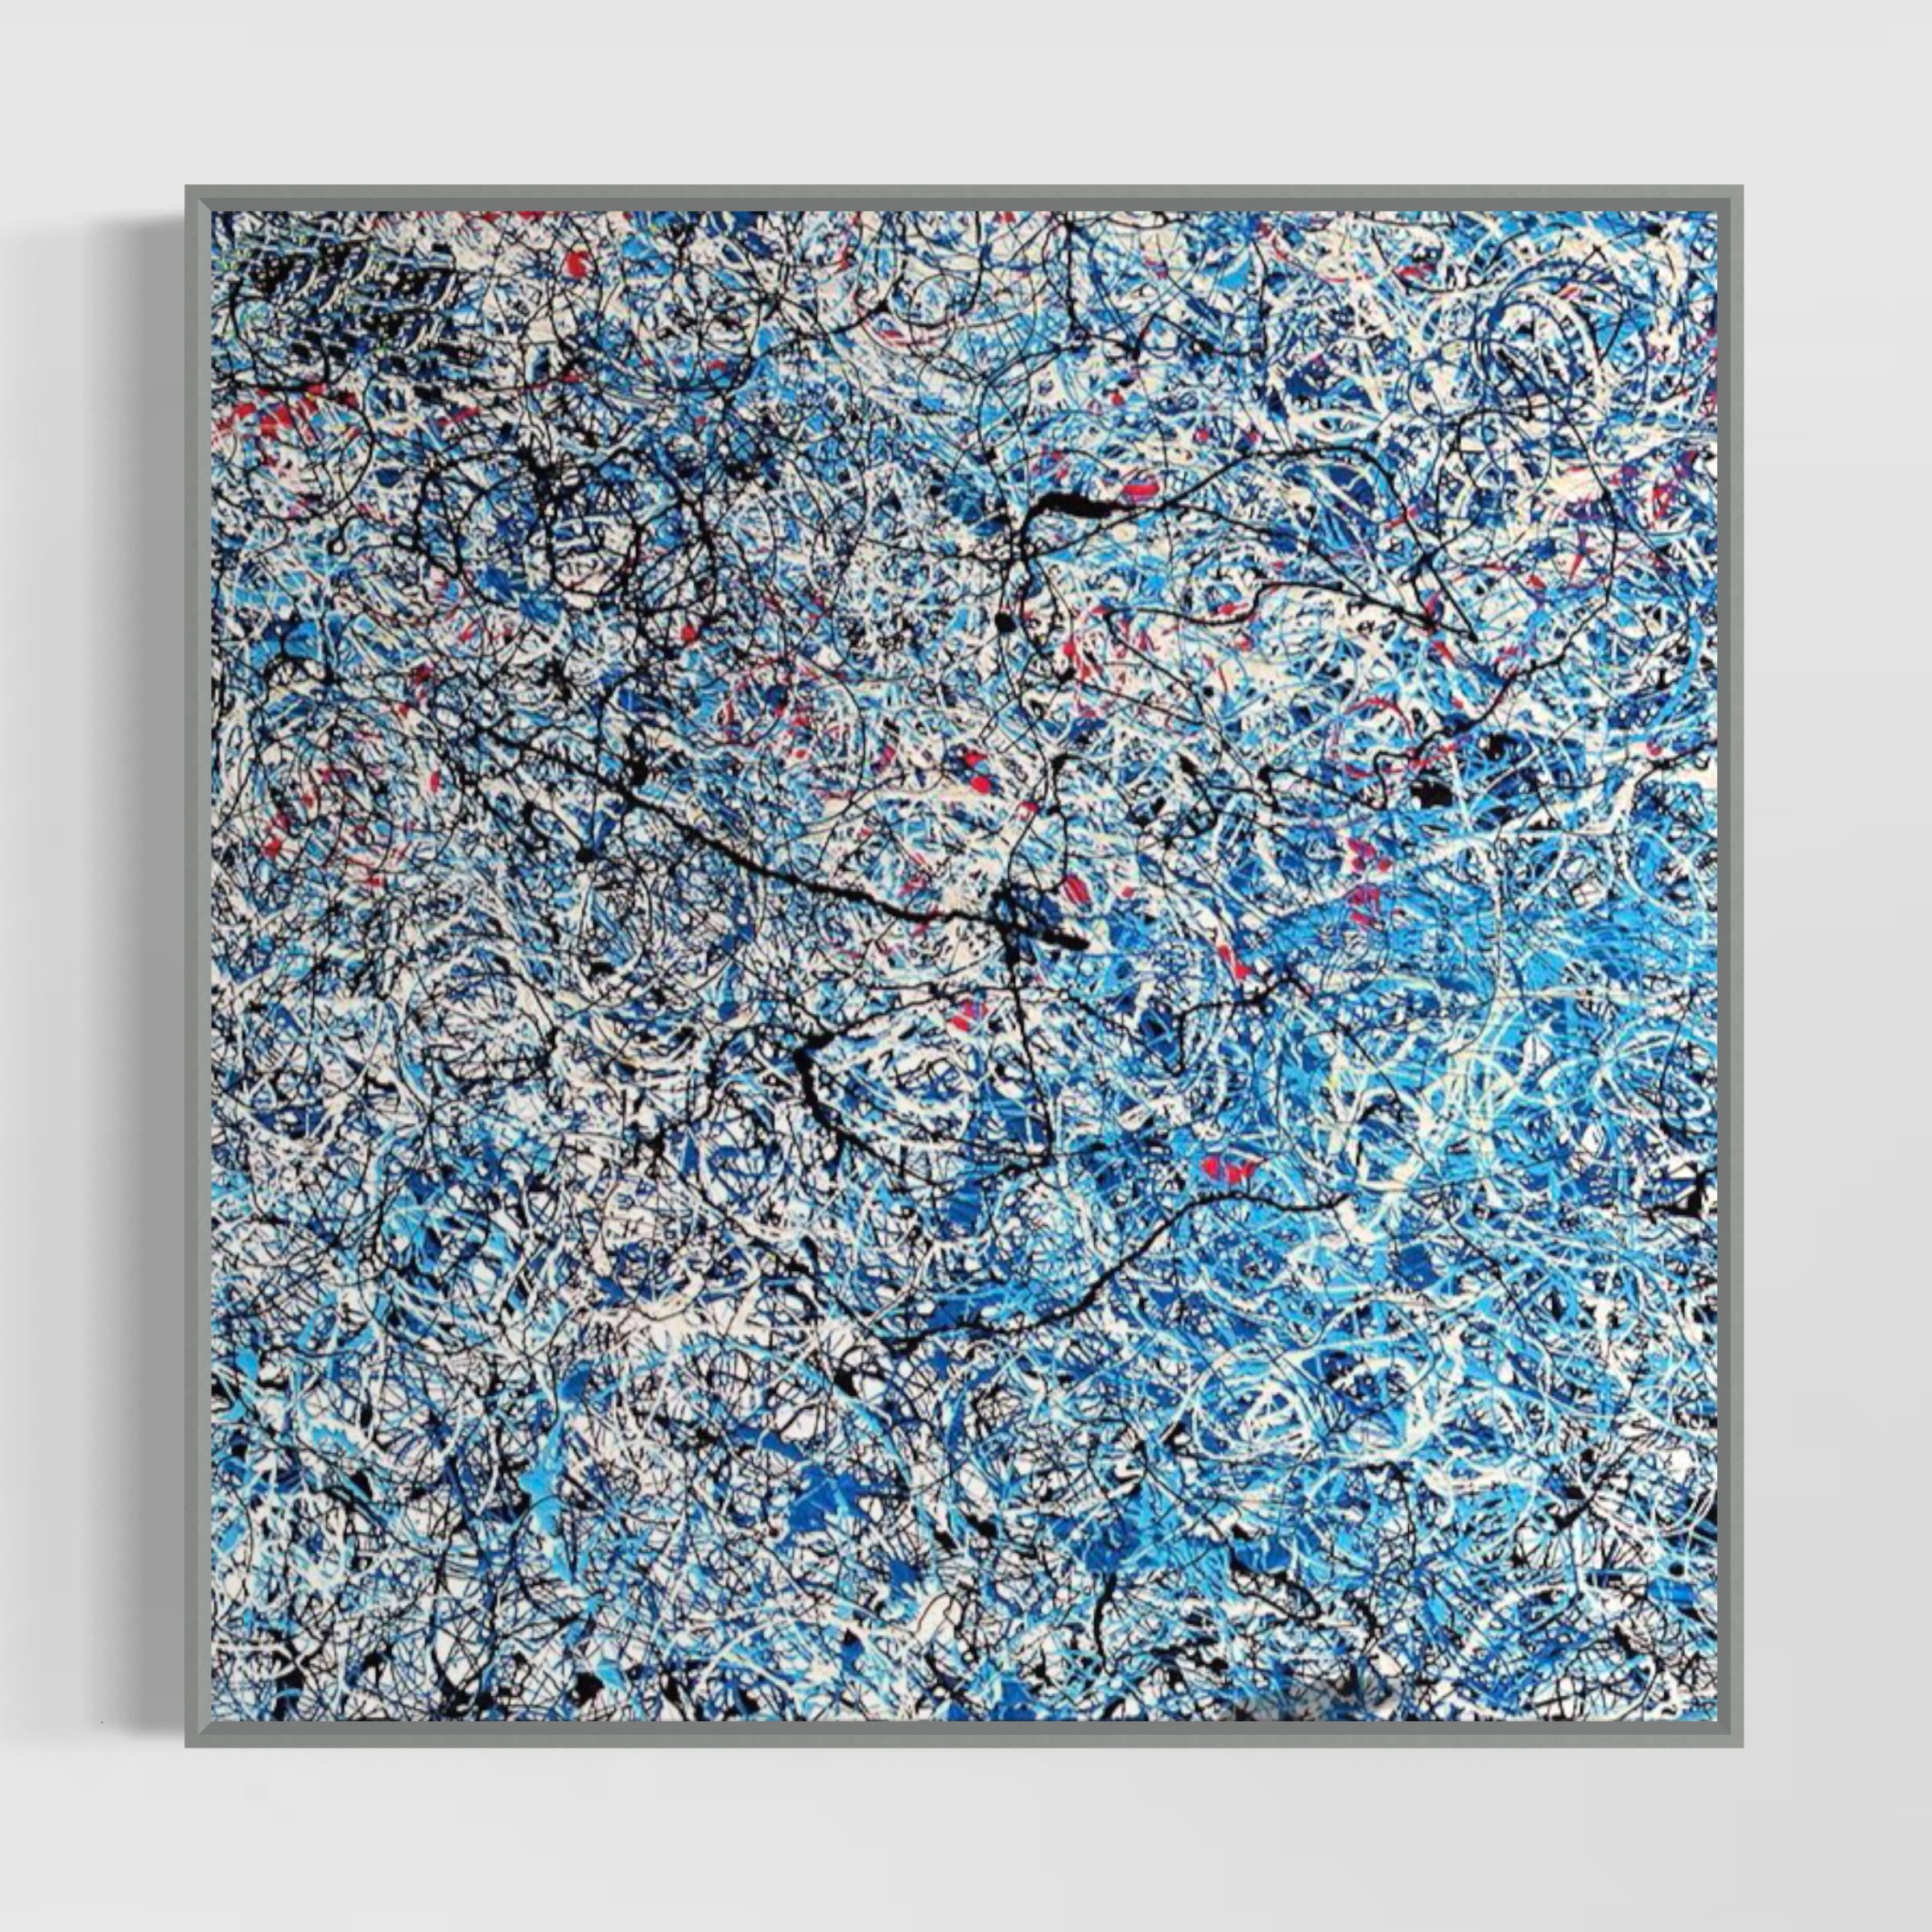 Gentle 1, Gallery Wrap (With Bleed) / 80x80cm